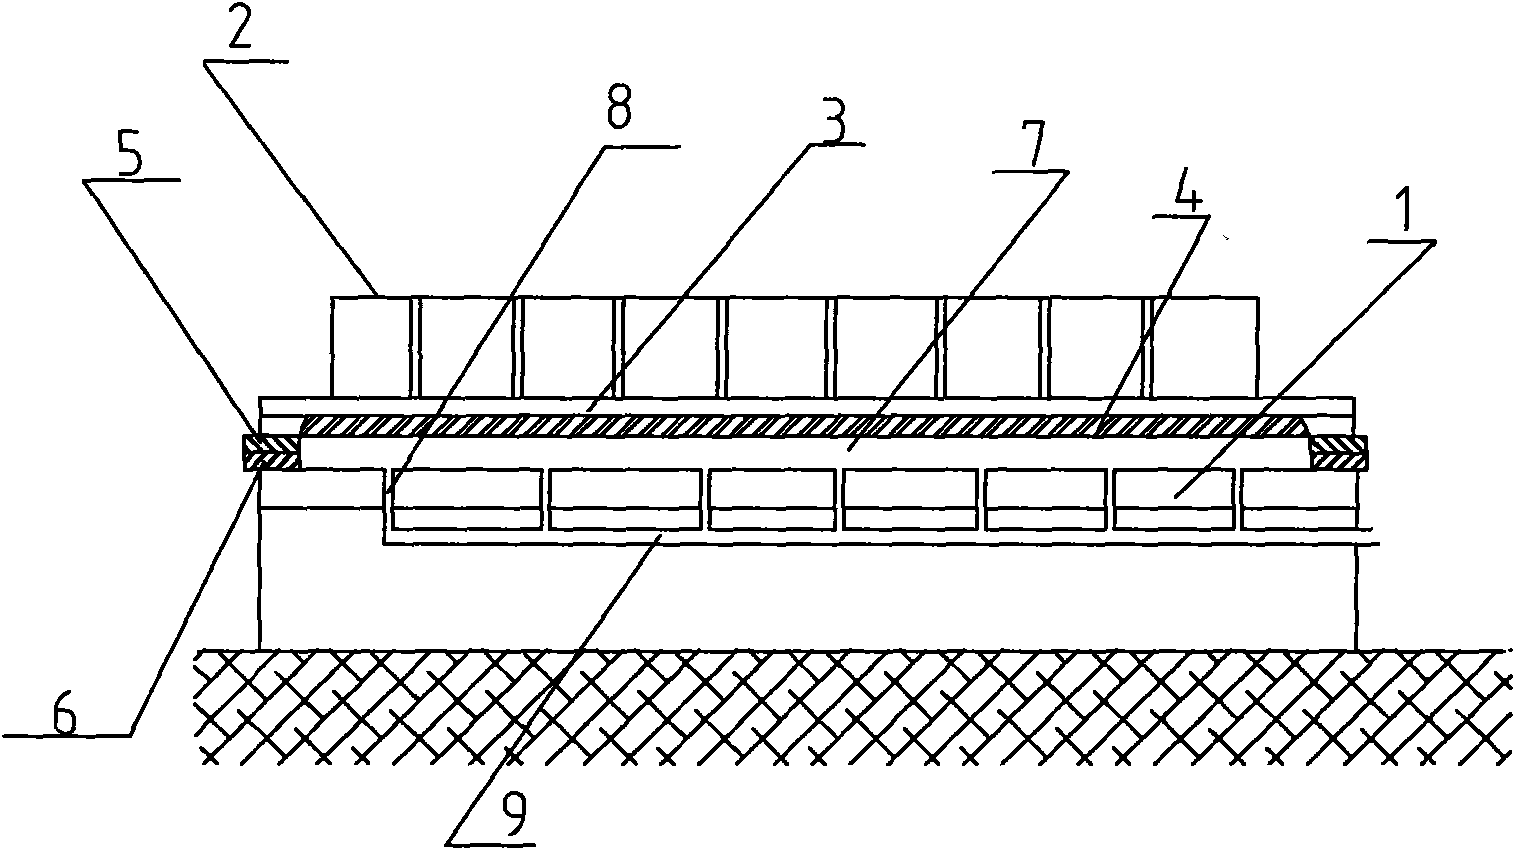 Hot plate uniformly heating technique for use in solar cell assembly process